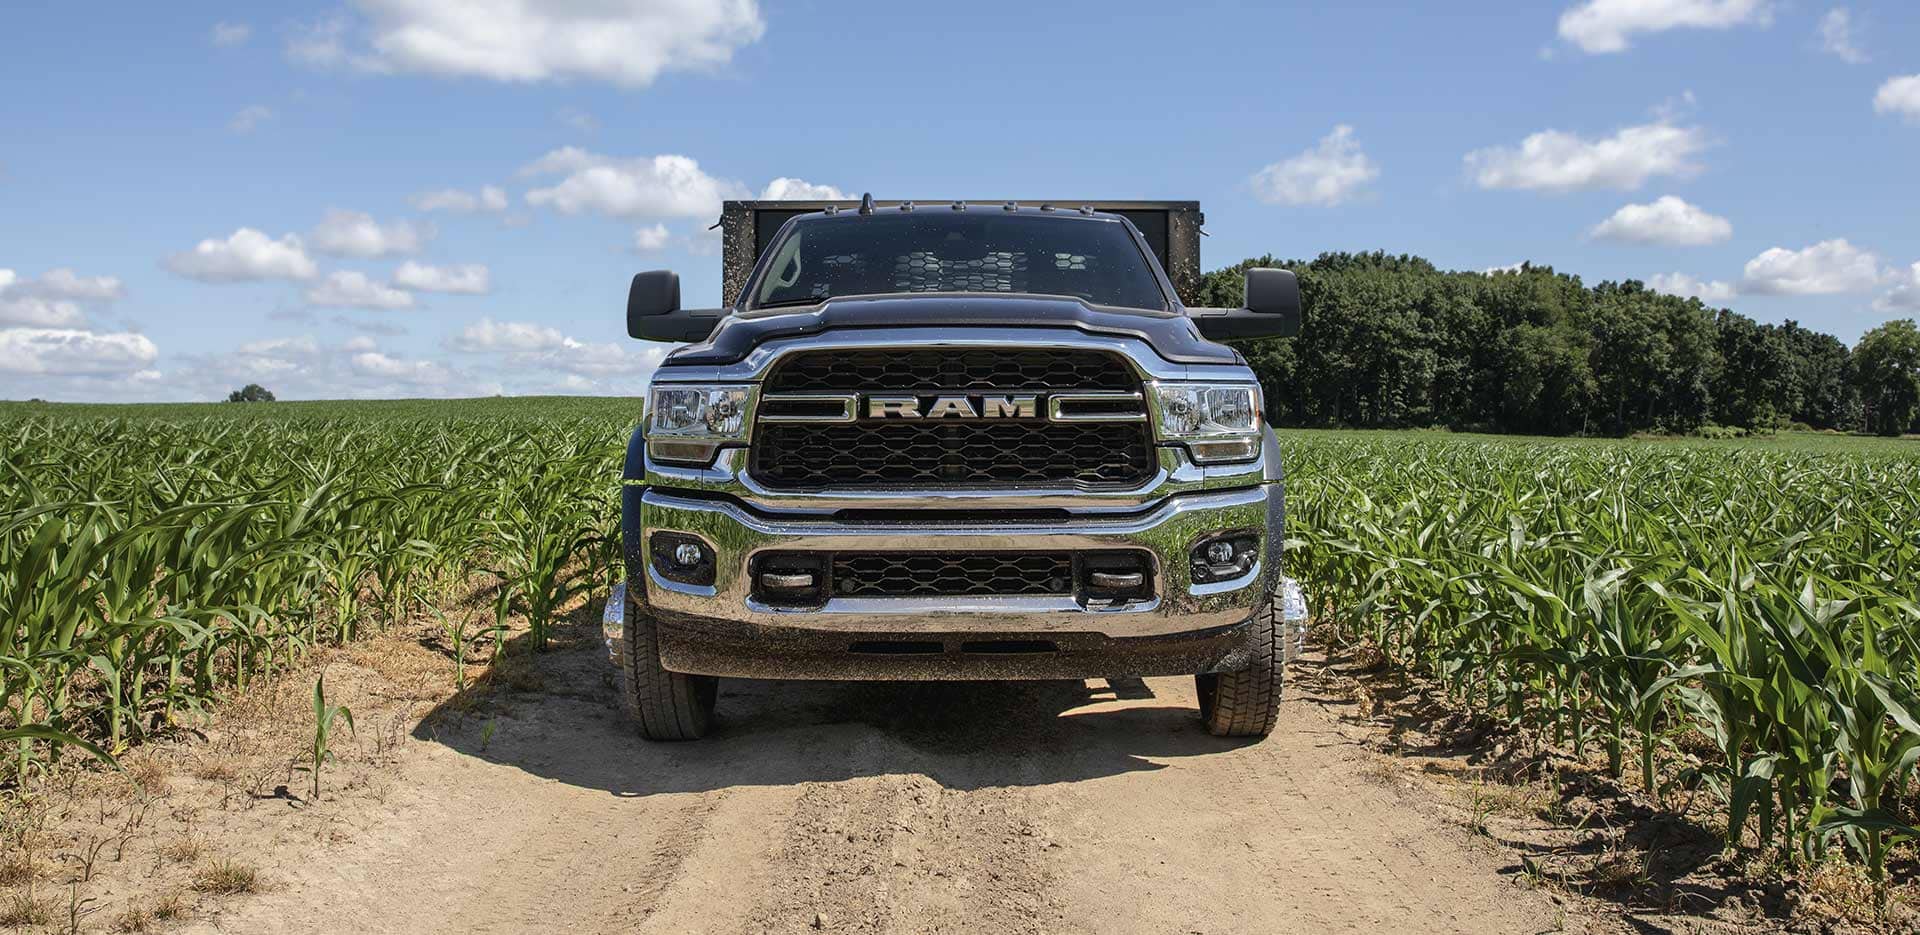 Display The 2023 Ram Chassis Cab with a stake bed upfit on a dirt road between fields of crops.